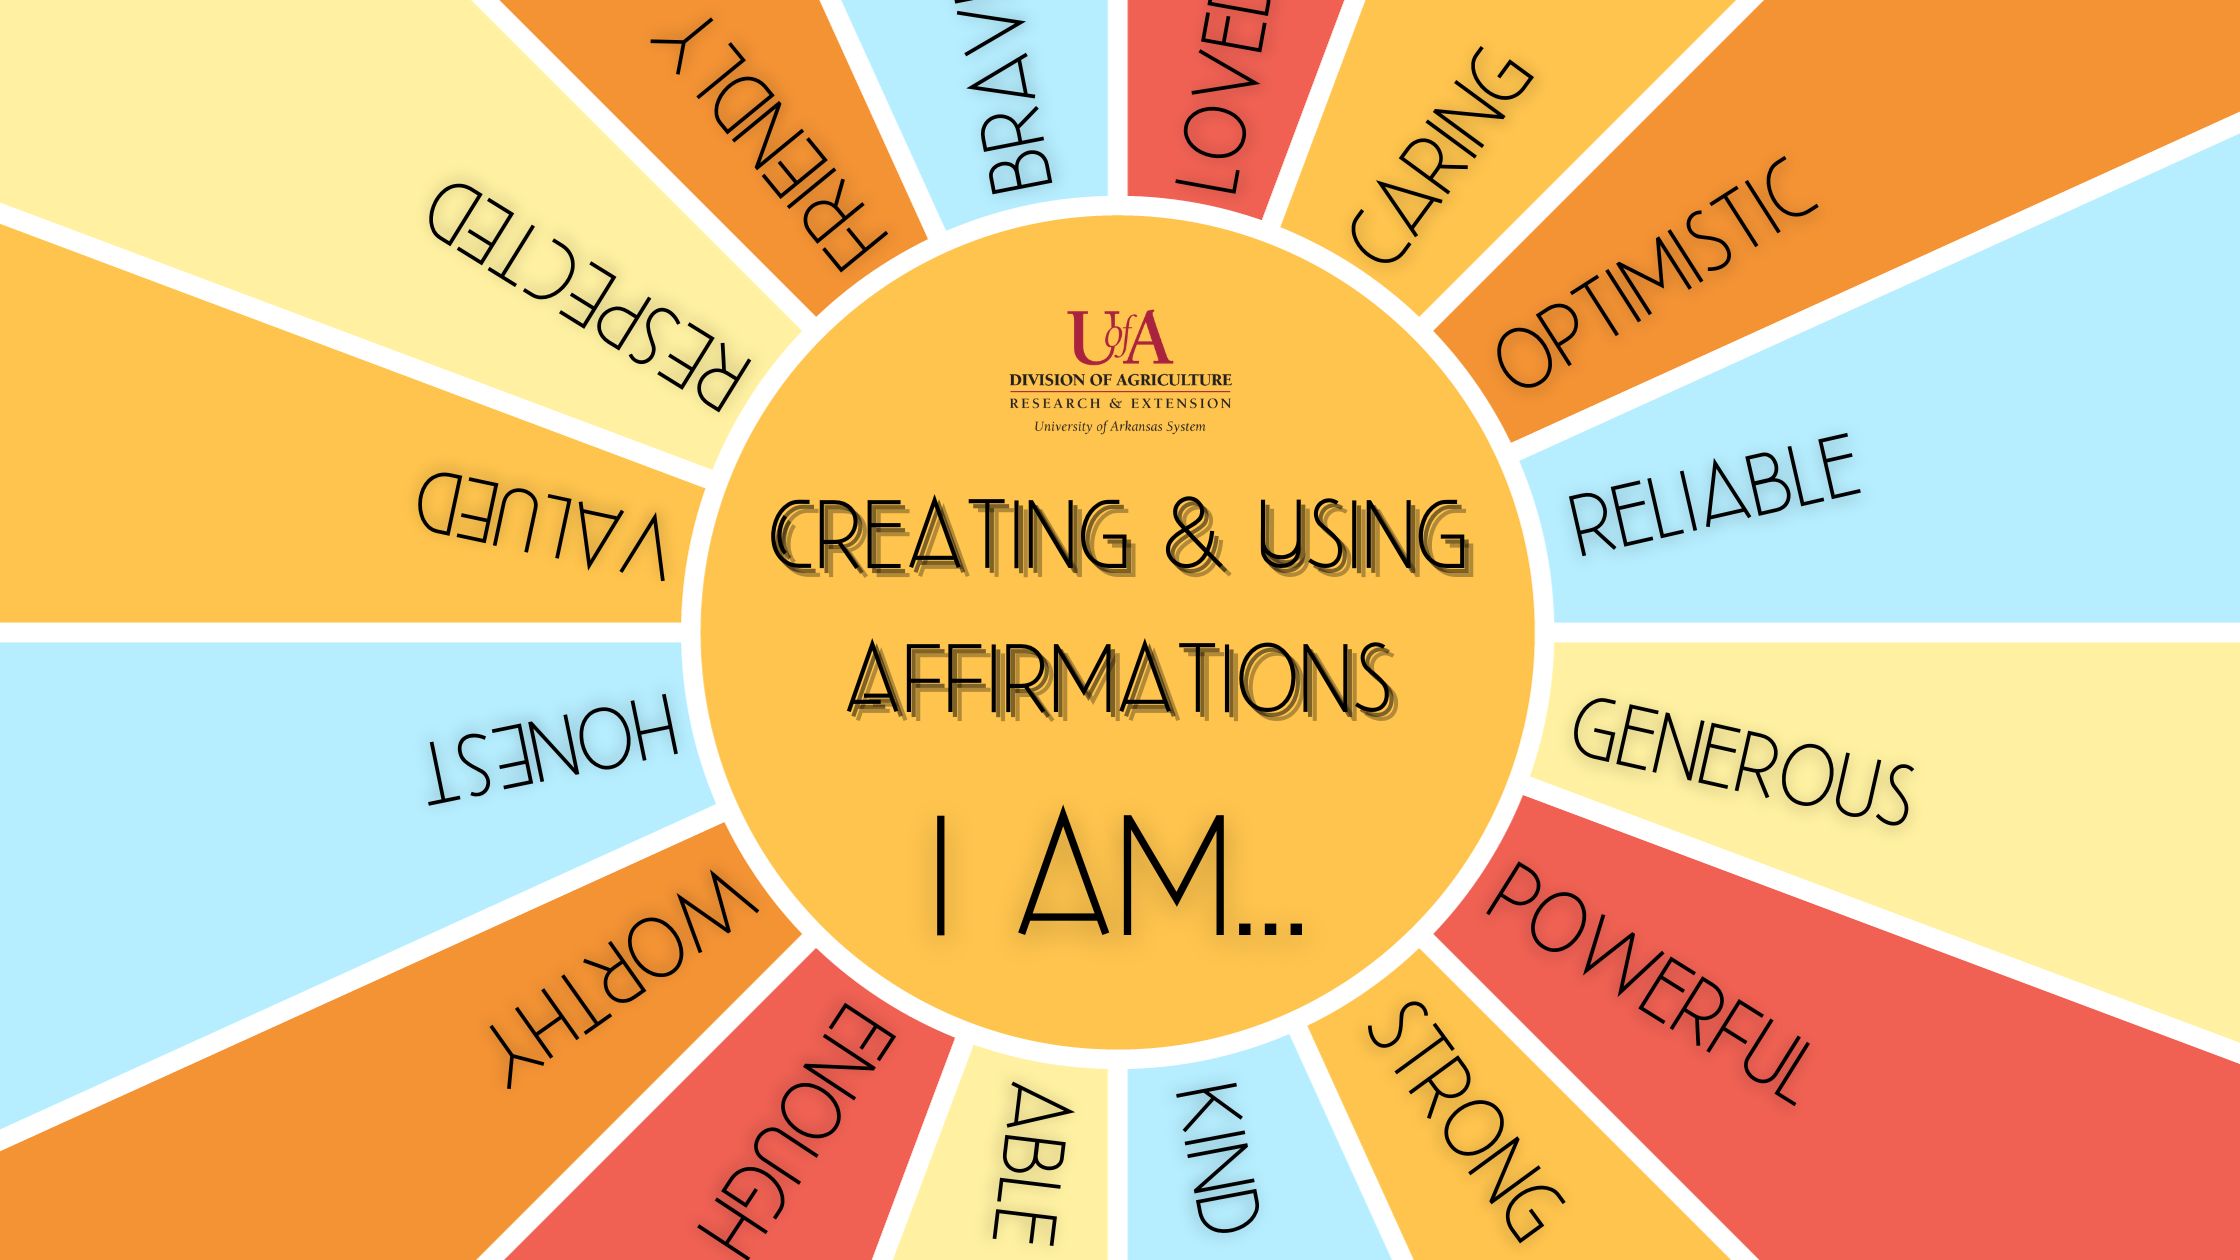 Creating and Using Affirmations. I am generous, kind, strong, caring, optimistic, and worthy.